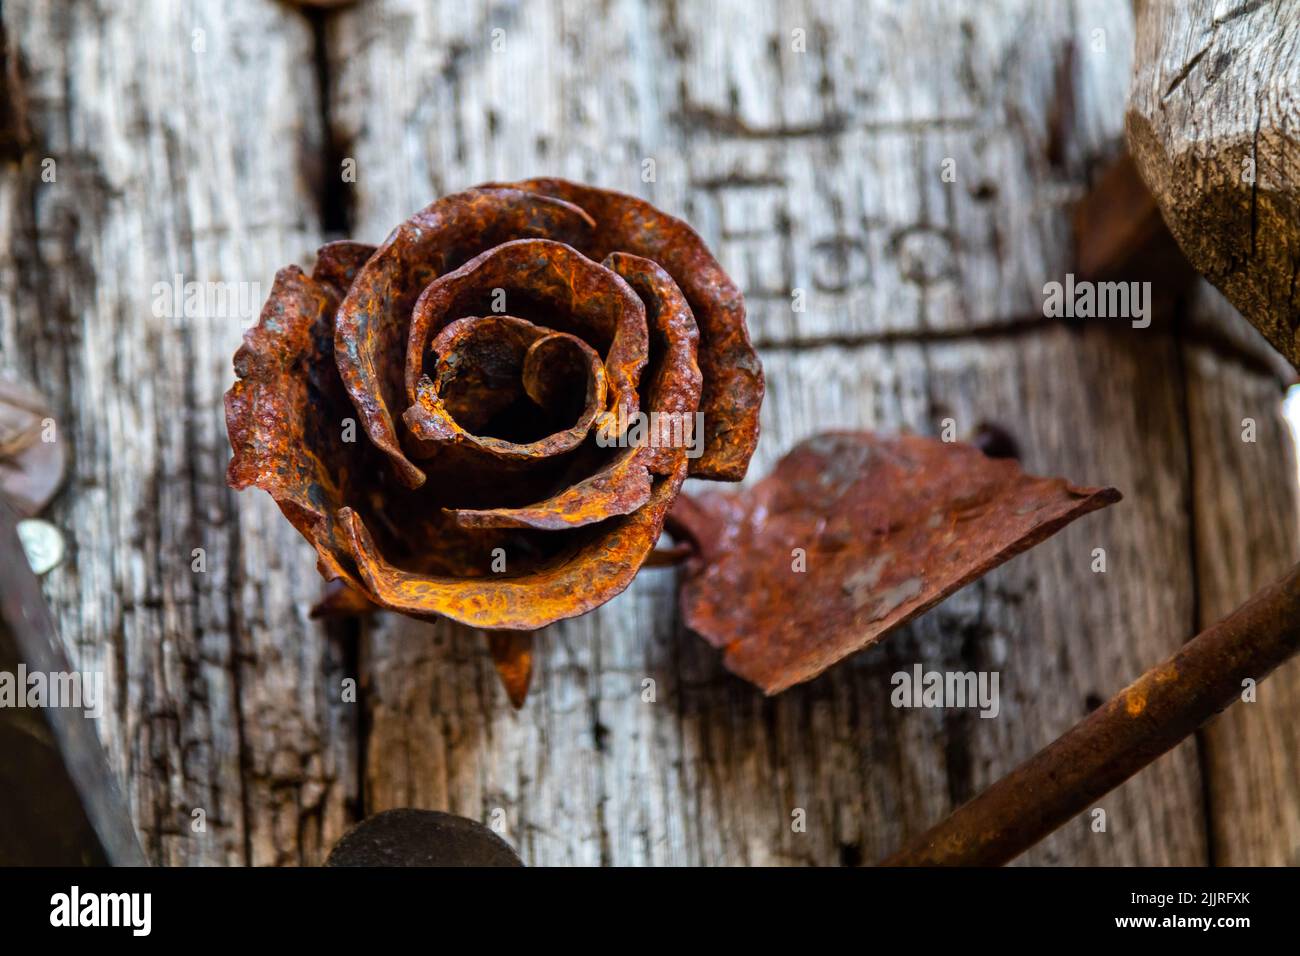 A closeup of a rusty metal rose isolated on a wooden background Stock Photo